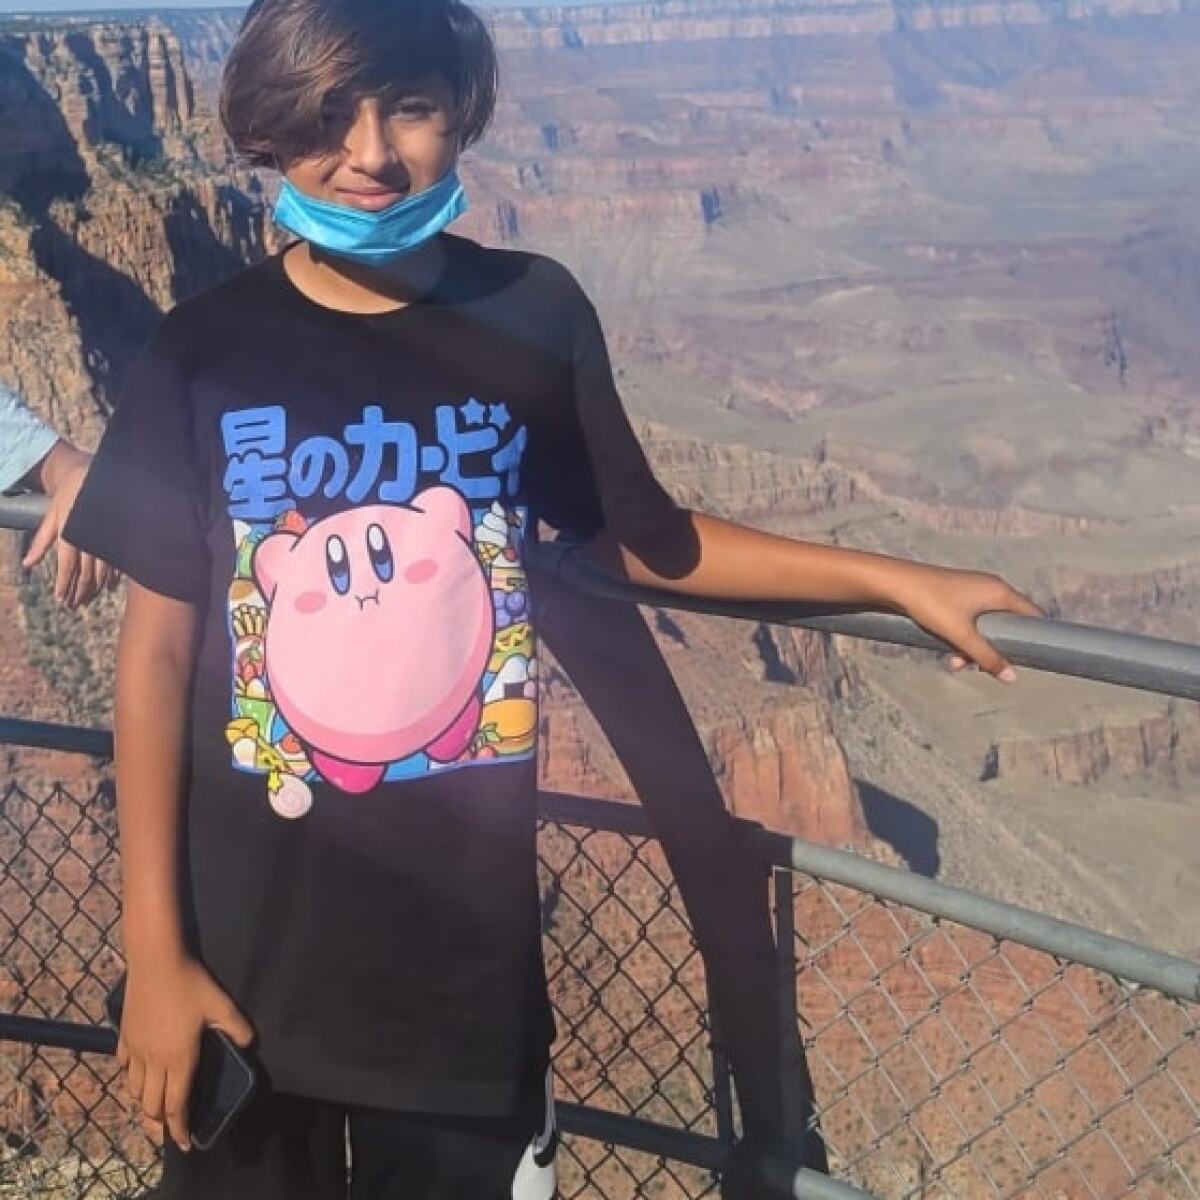 Angel Gaspar, 12, seen here at the Grand Canyon, was fatally shot Thursday.